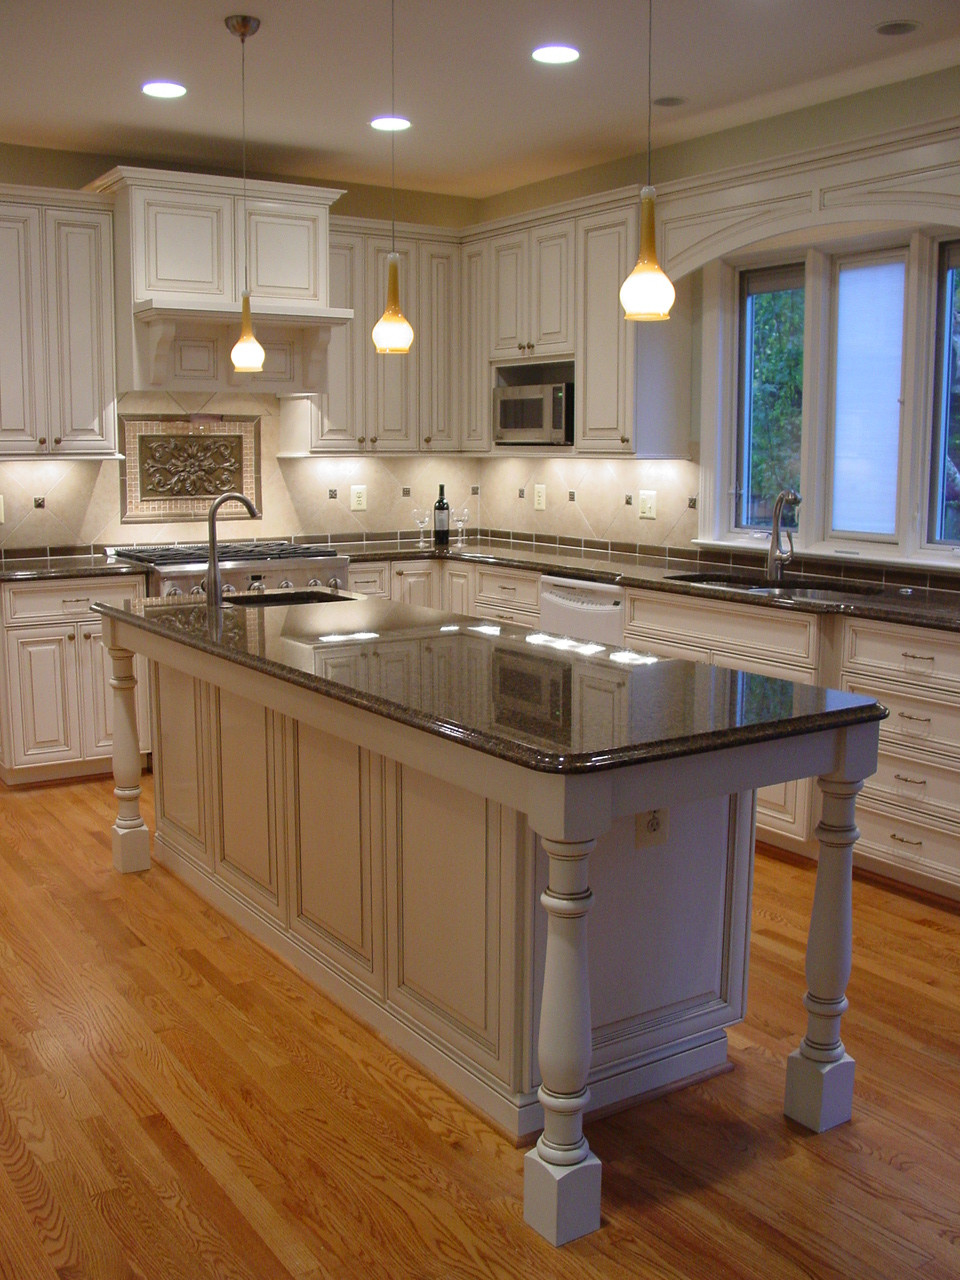 Kitchen Remodeling Photos
 Kitchen Trends for 2015